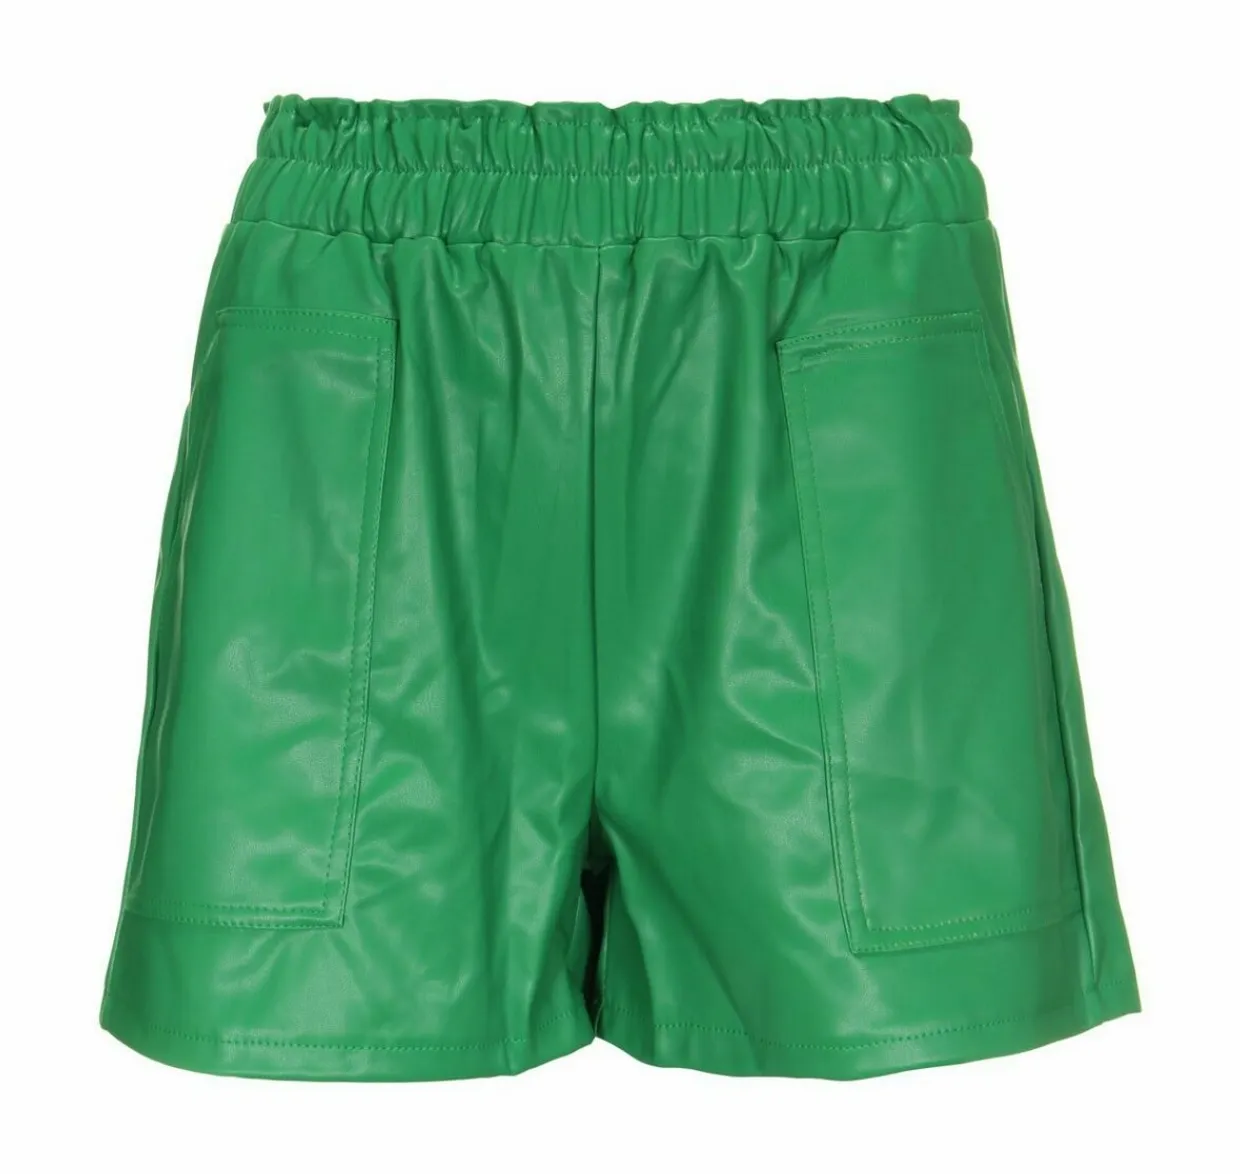 Leather short green